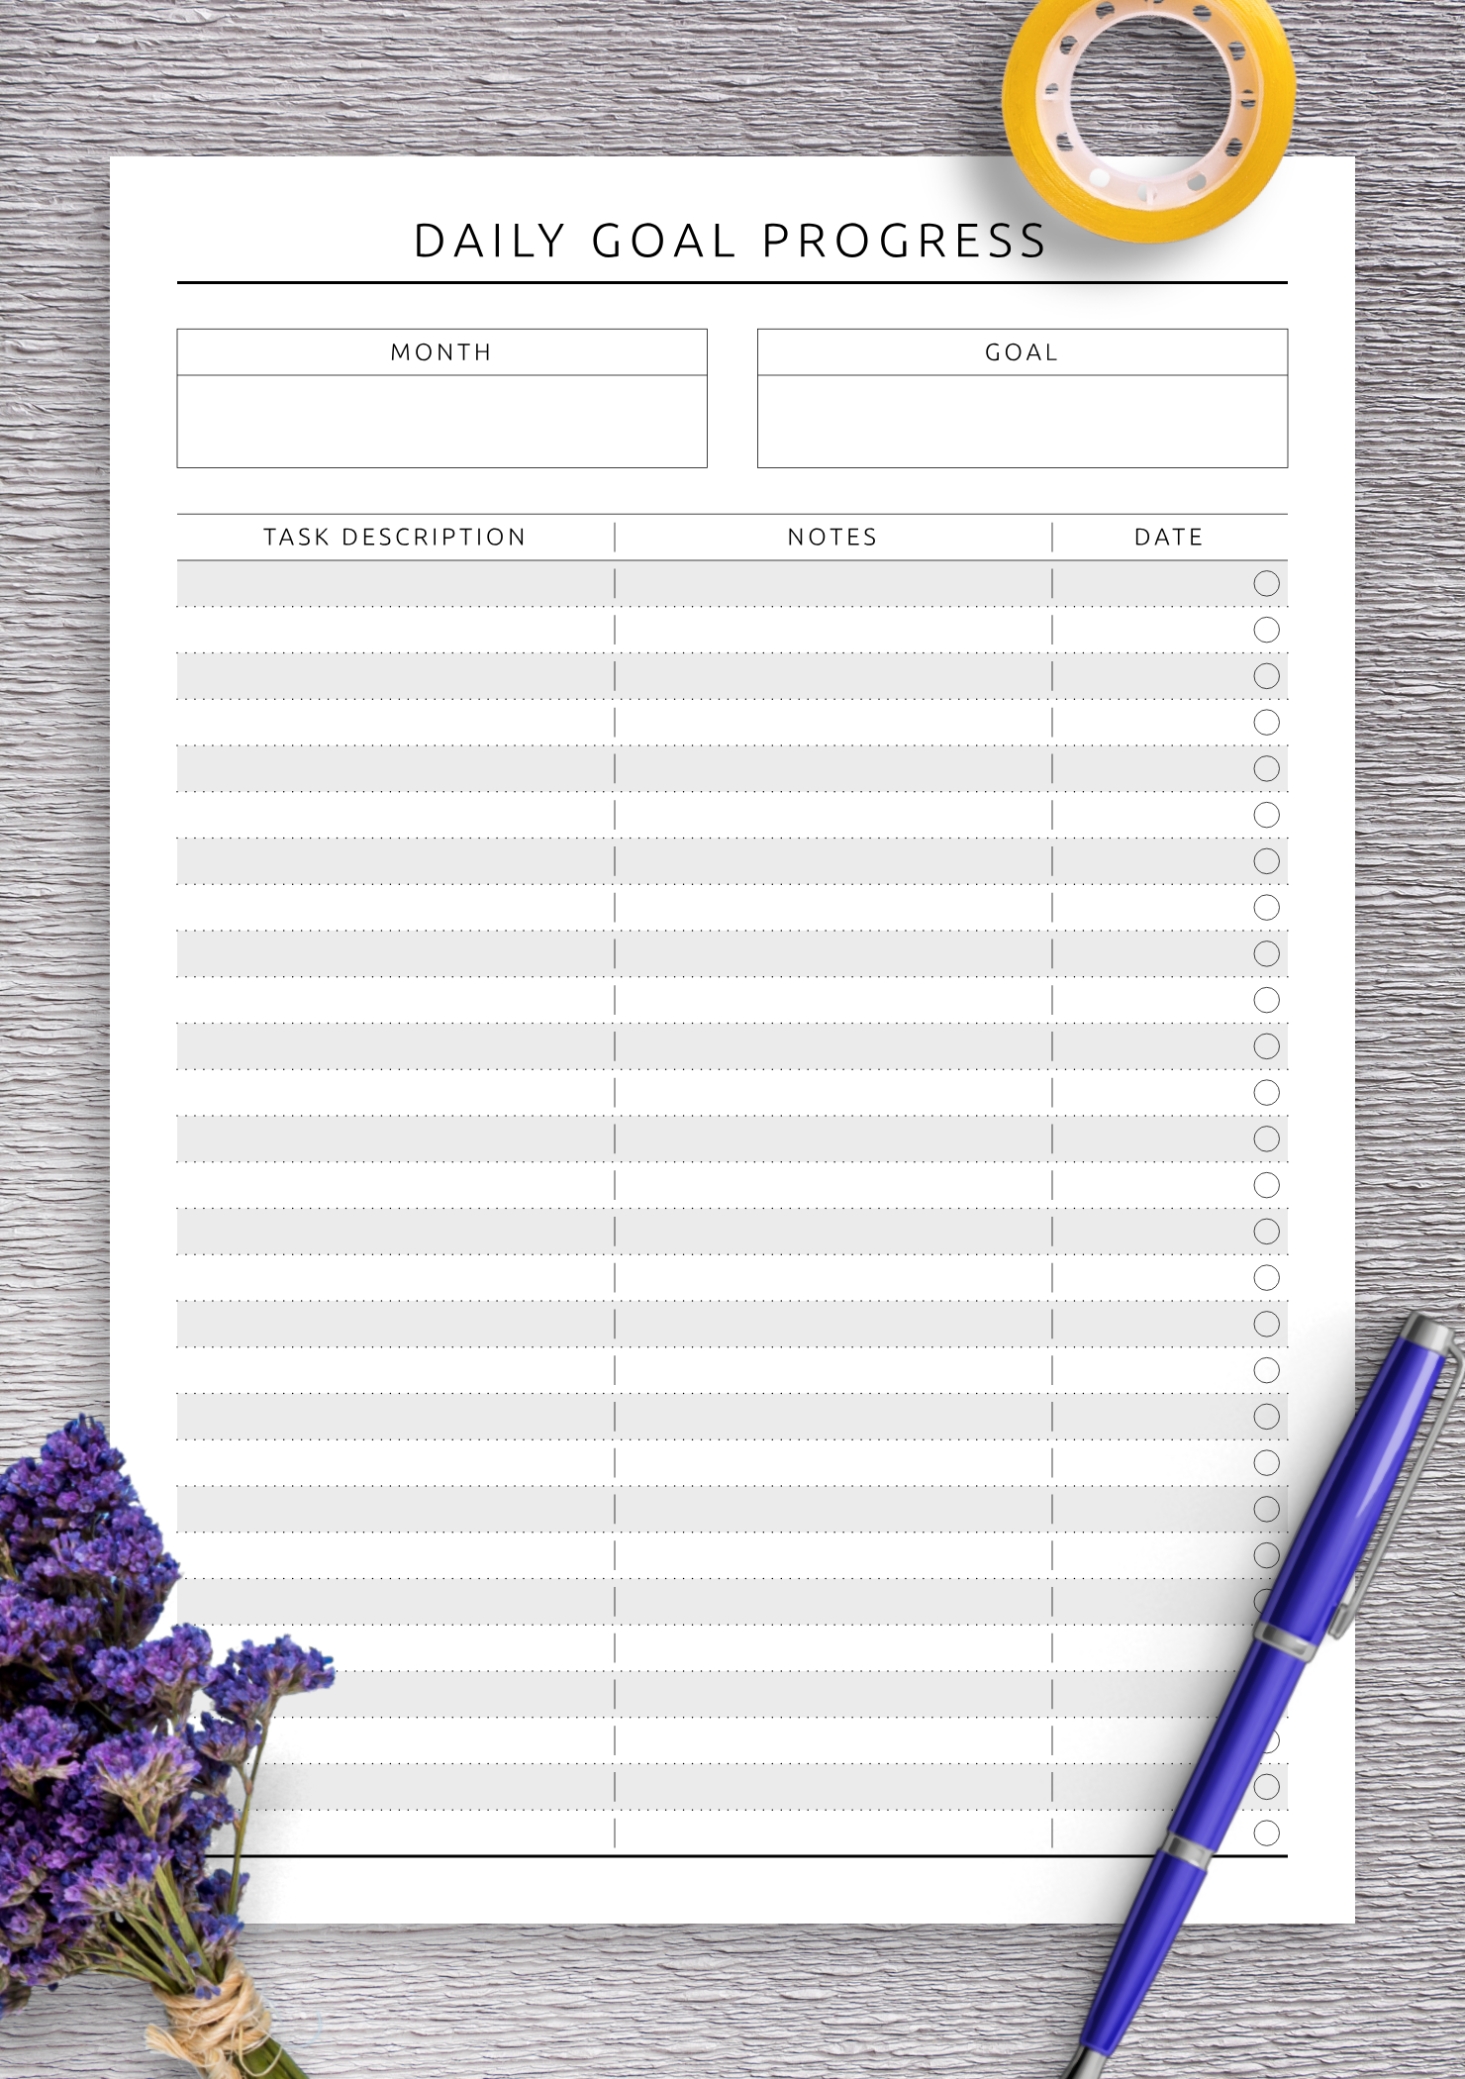 Download Printable Daily Goal Progress Pdf For Daily Progress Note Template